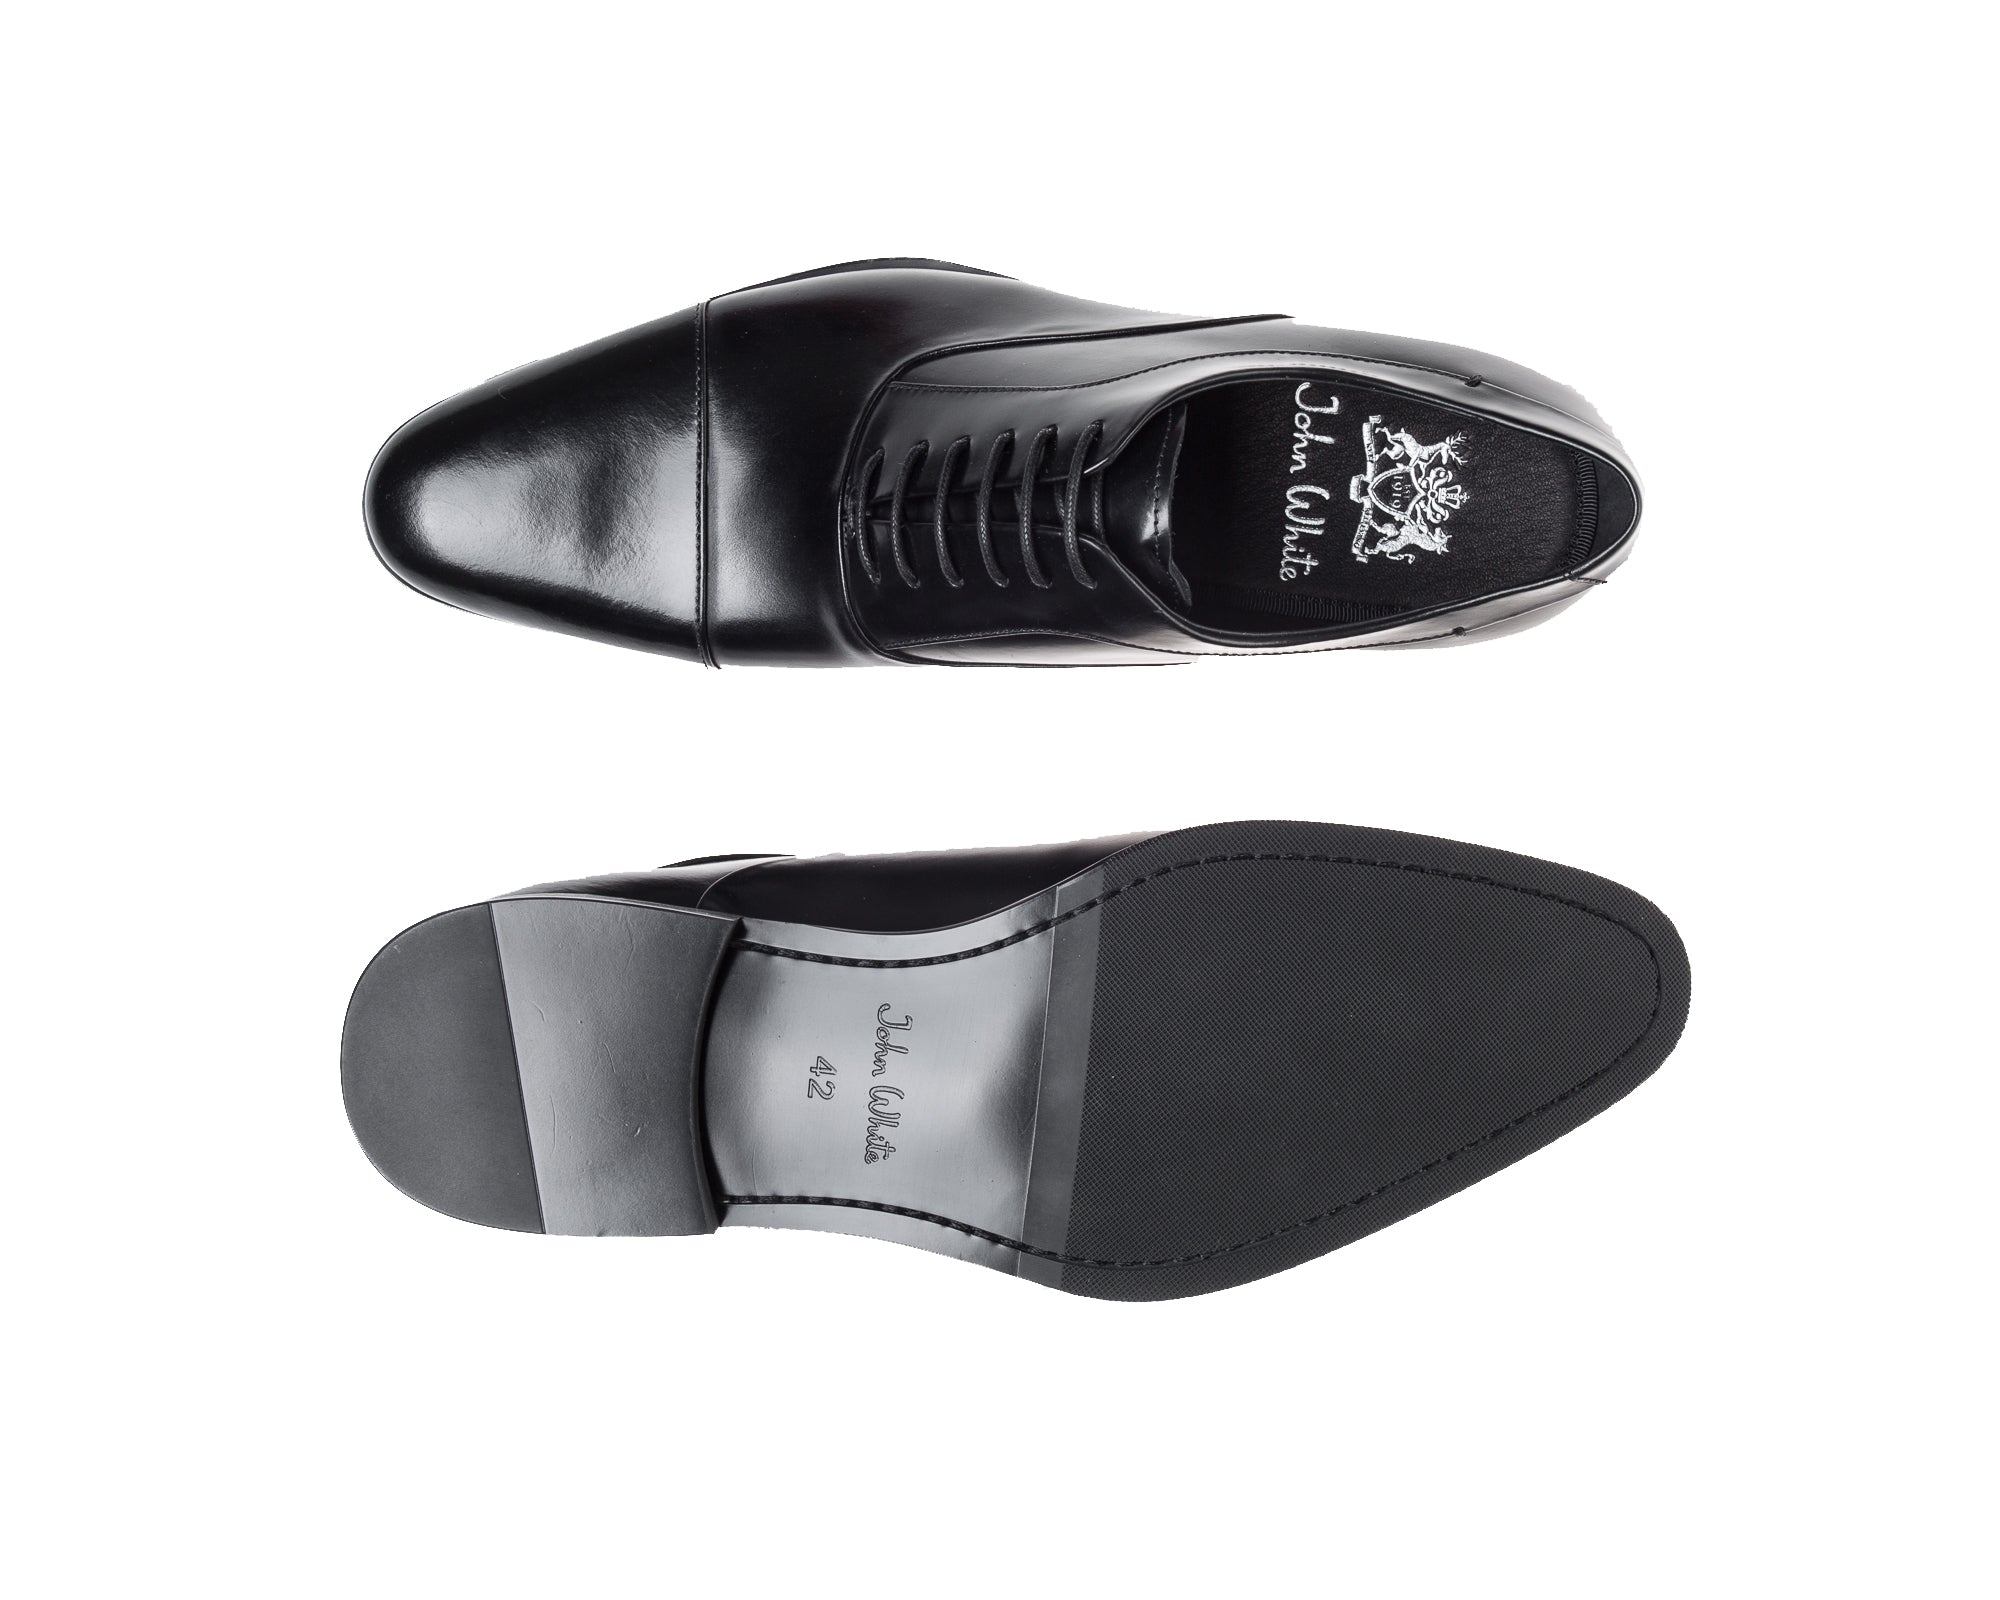 Guildhall Calf Shoe Black-Sole View